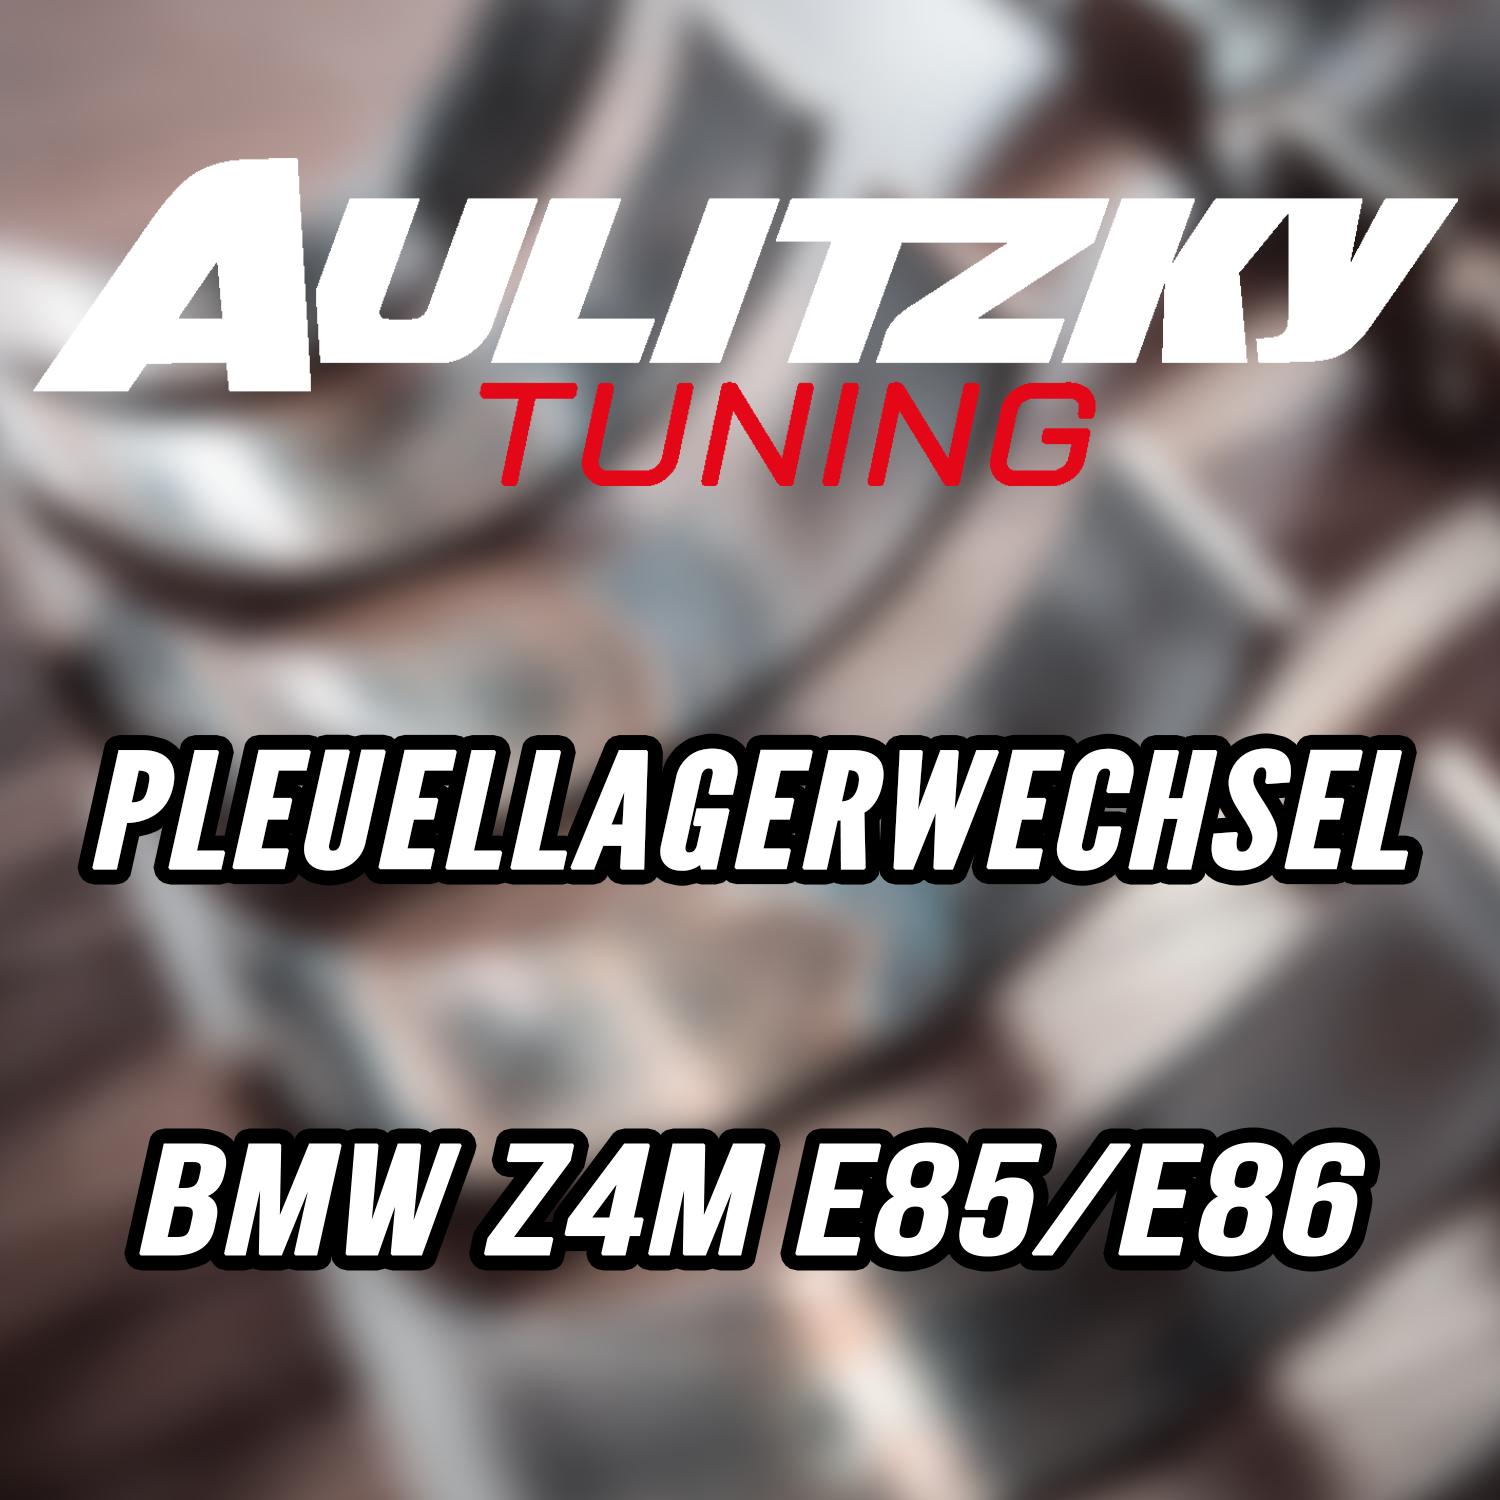 Aulitzky Tuning | Pleuellagerwechsel | BMW Z4M (E85/E86) 343PS S54